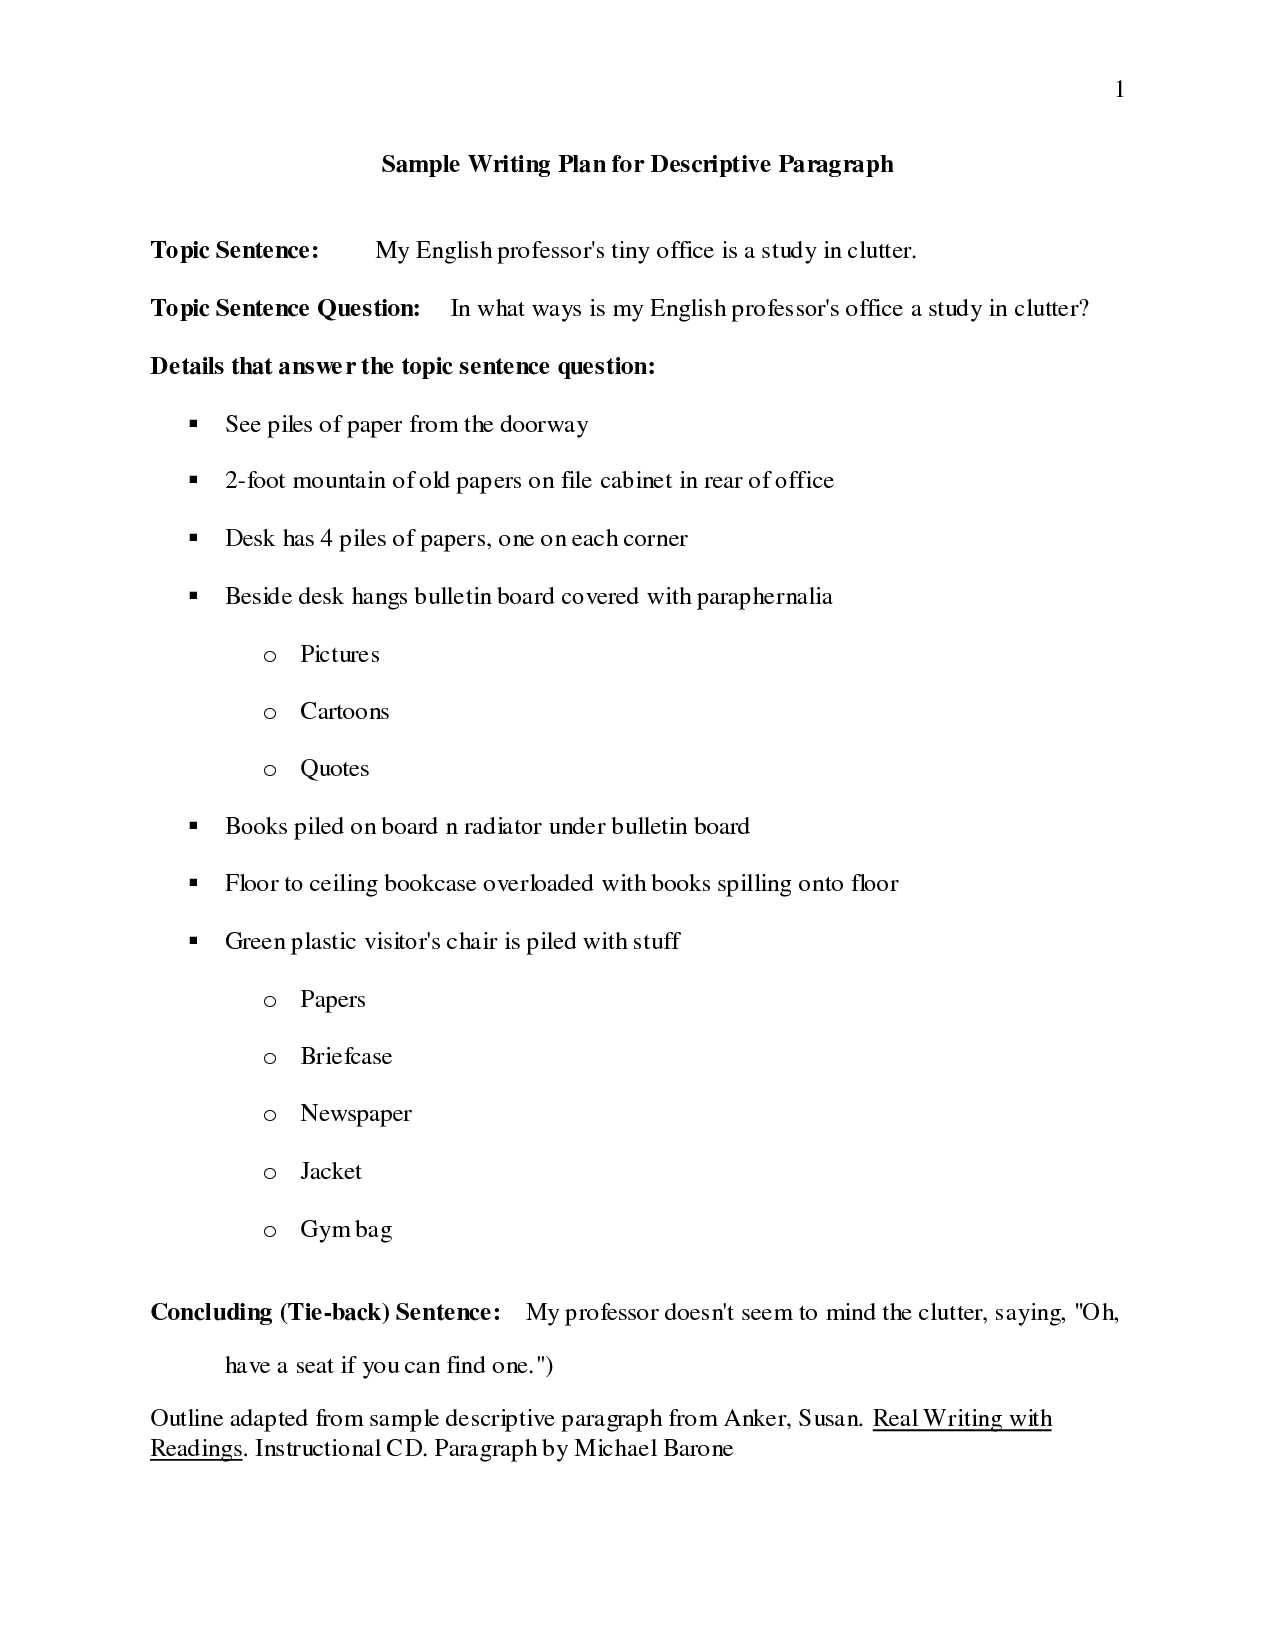 Personal Narrative Peer Review Worksheet as Well as Outline for Five Paragraph Essay 5 Paragraph Essay Outline Example